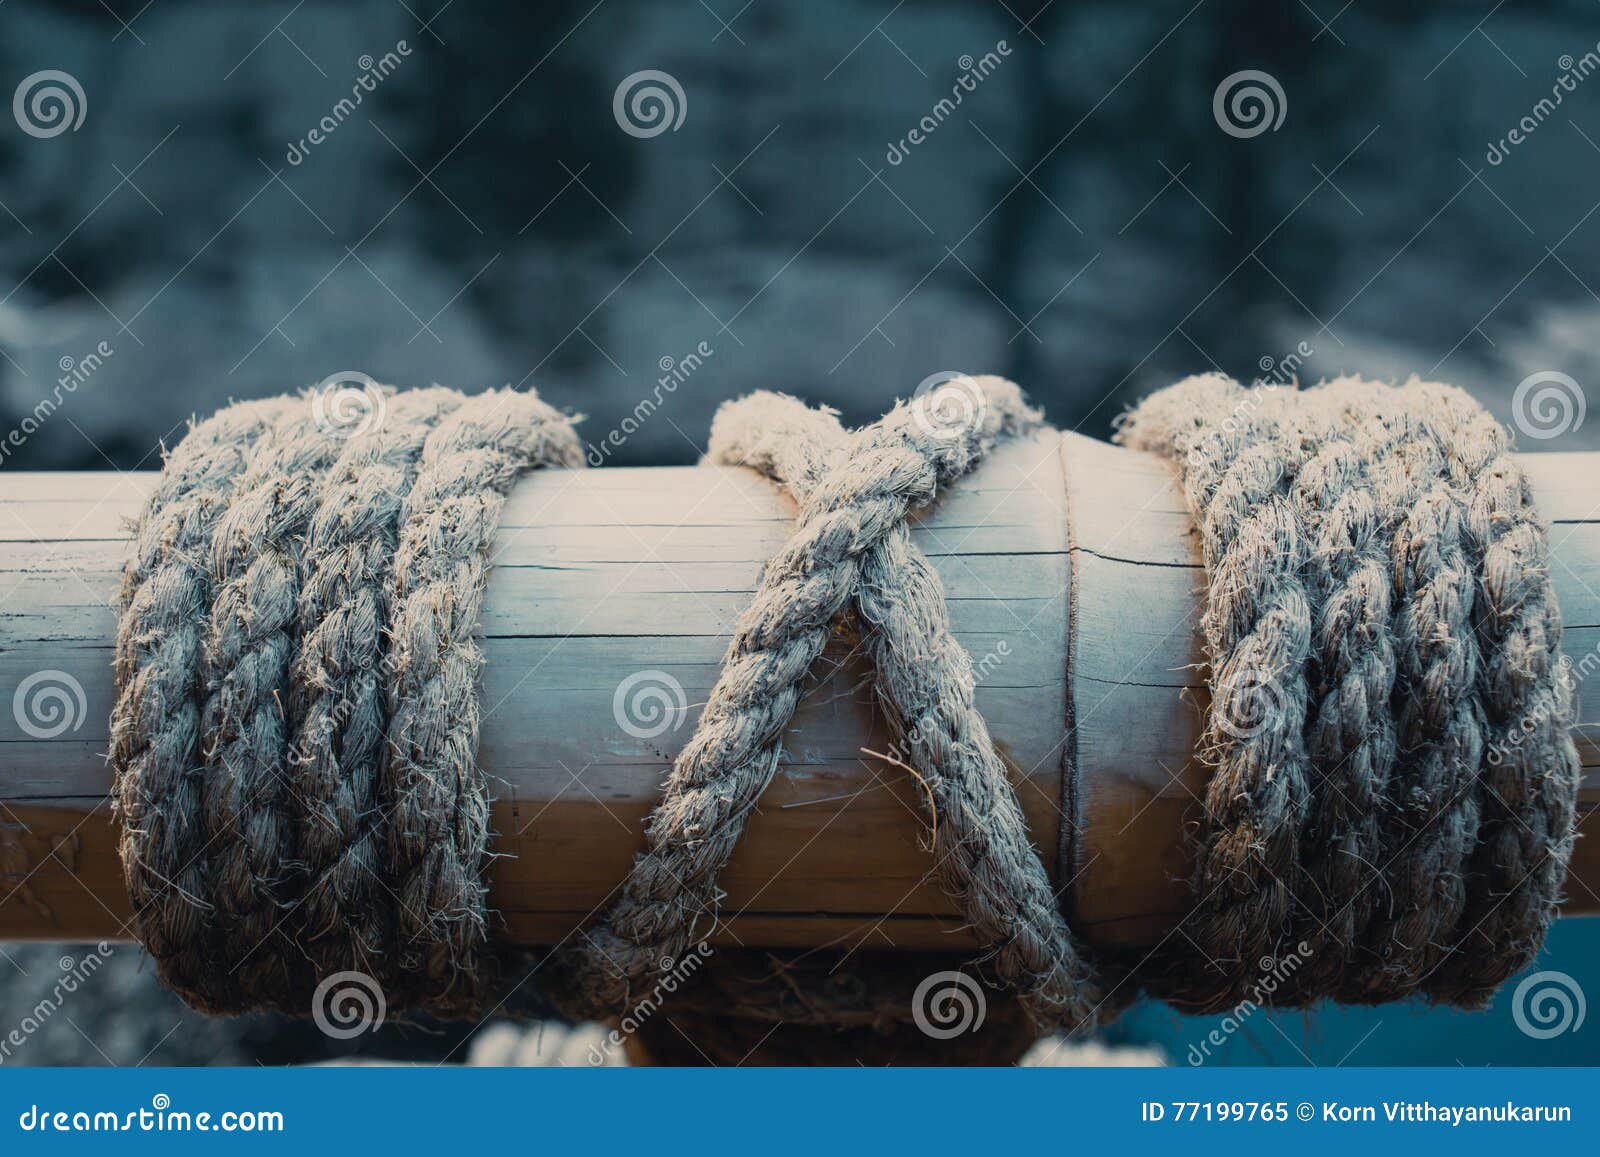 Japan Style Bamboo Rope Tire. Stock Image - Image of technic, rope